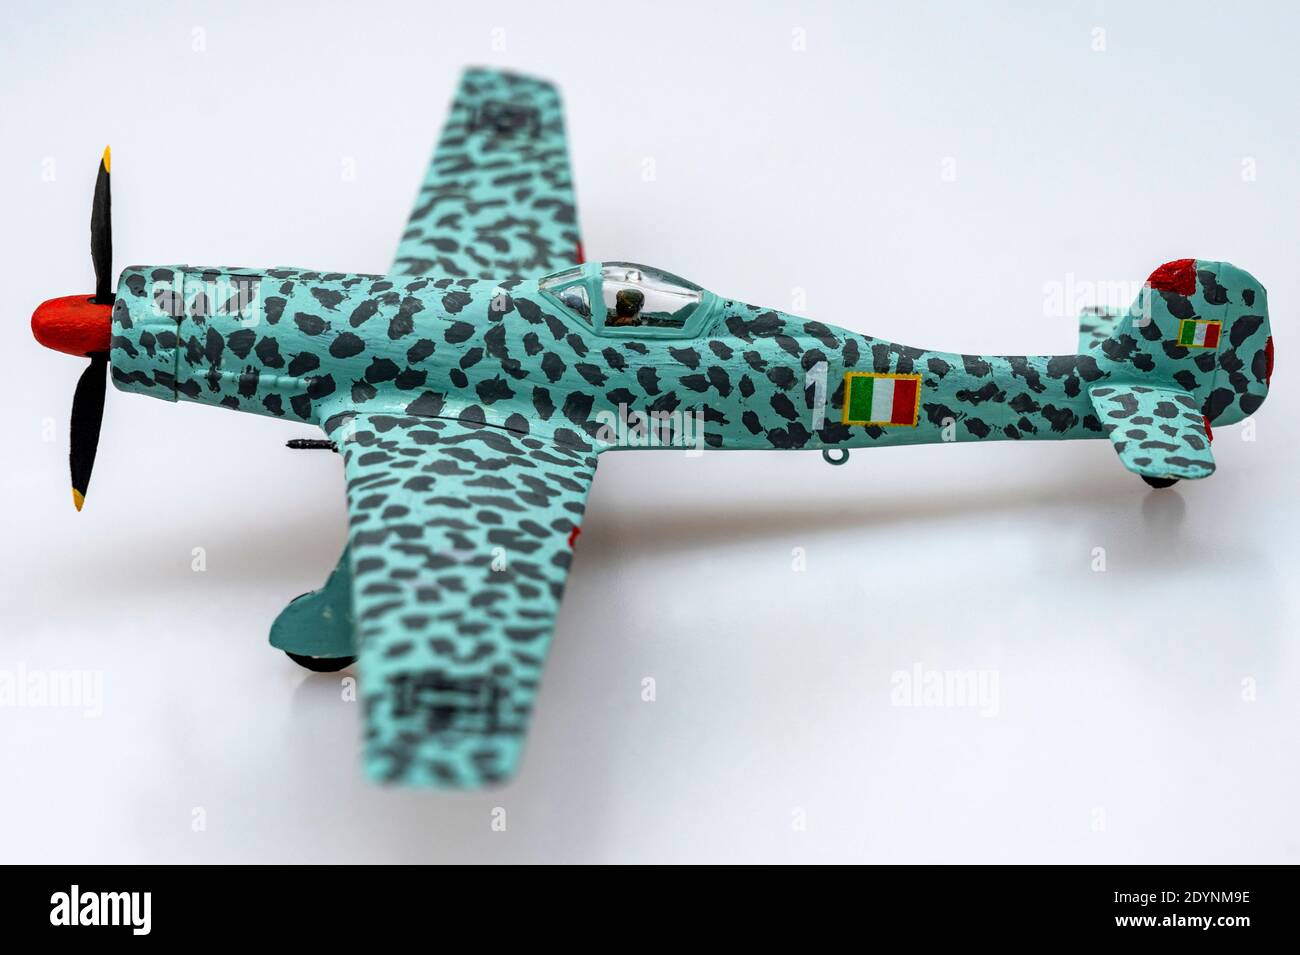 51 Base at Swabisch Hall December 1944 1/72 Aircraft Finished Plane Non diecast J Easy Model Me262 A-2a 9K+BN 5./KG